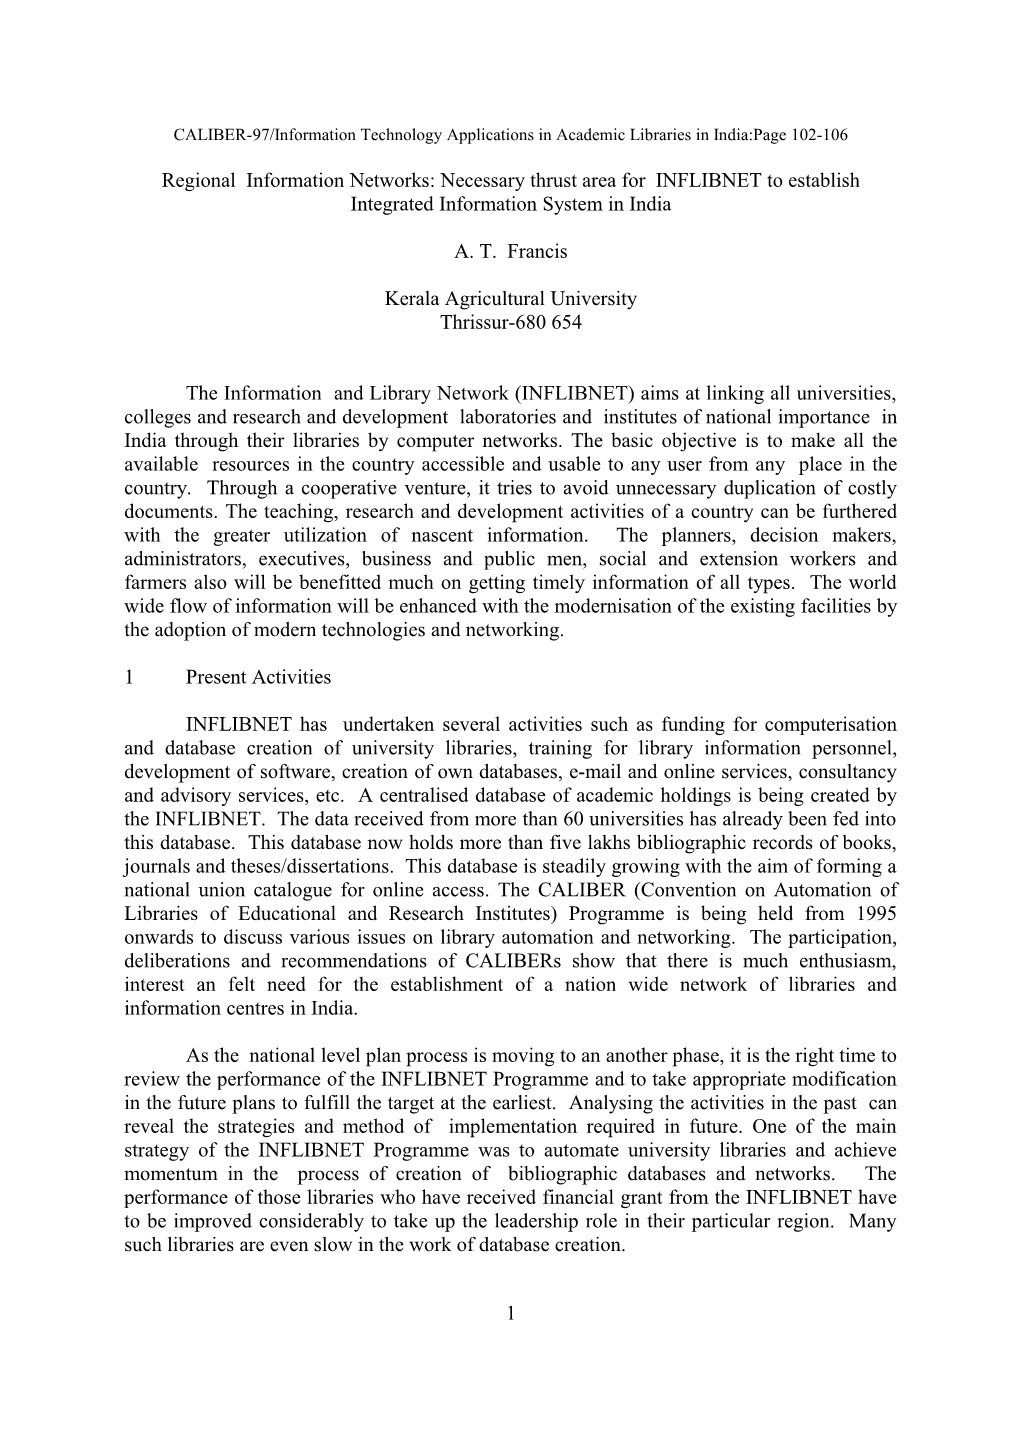 CALIBER-97/Information Technology Applications in Academic Libraries in India:Page 102-106